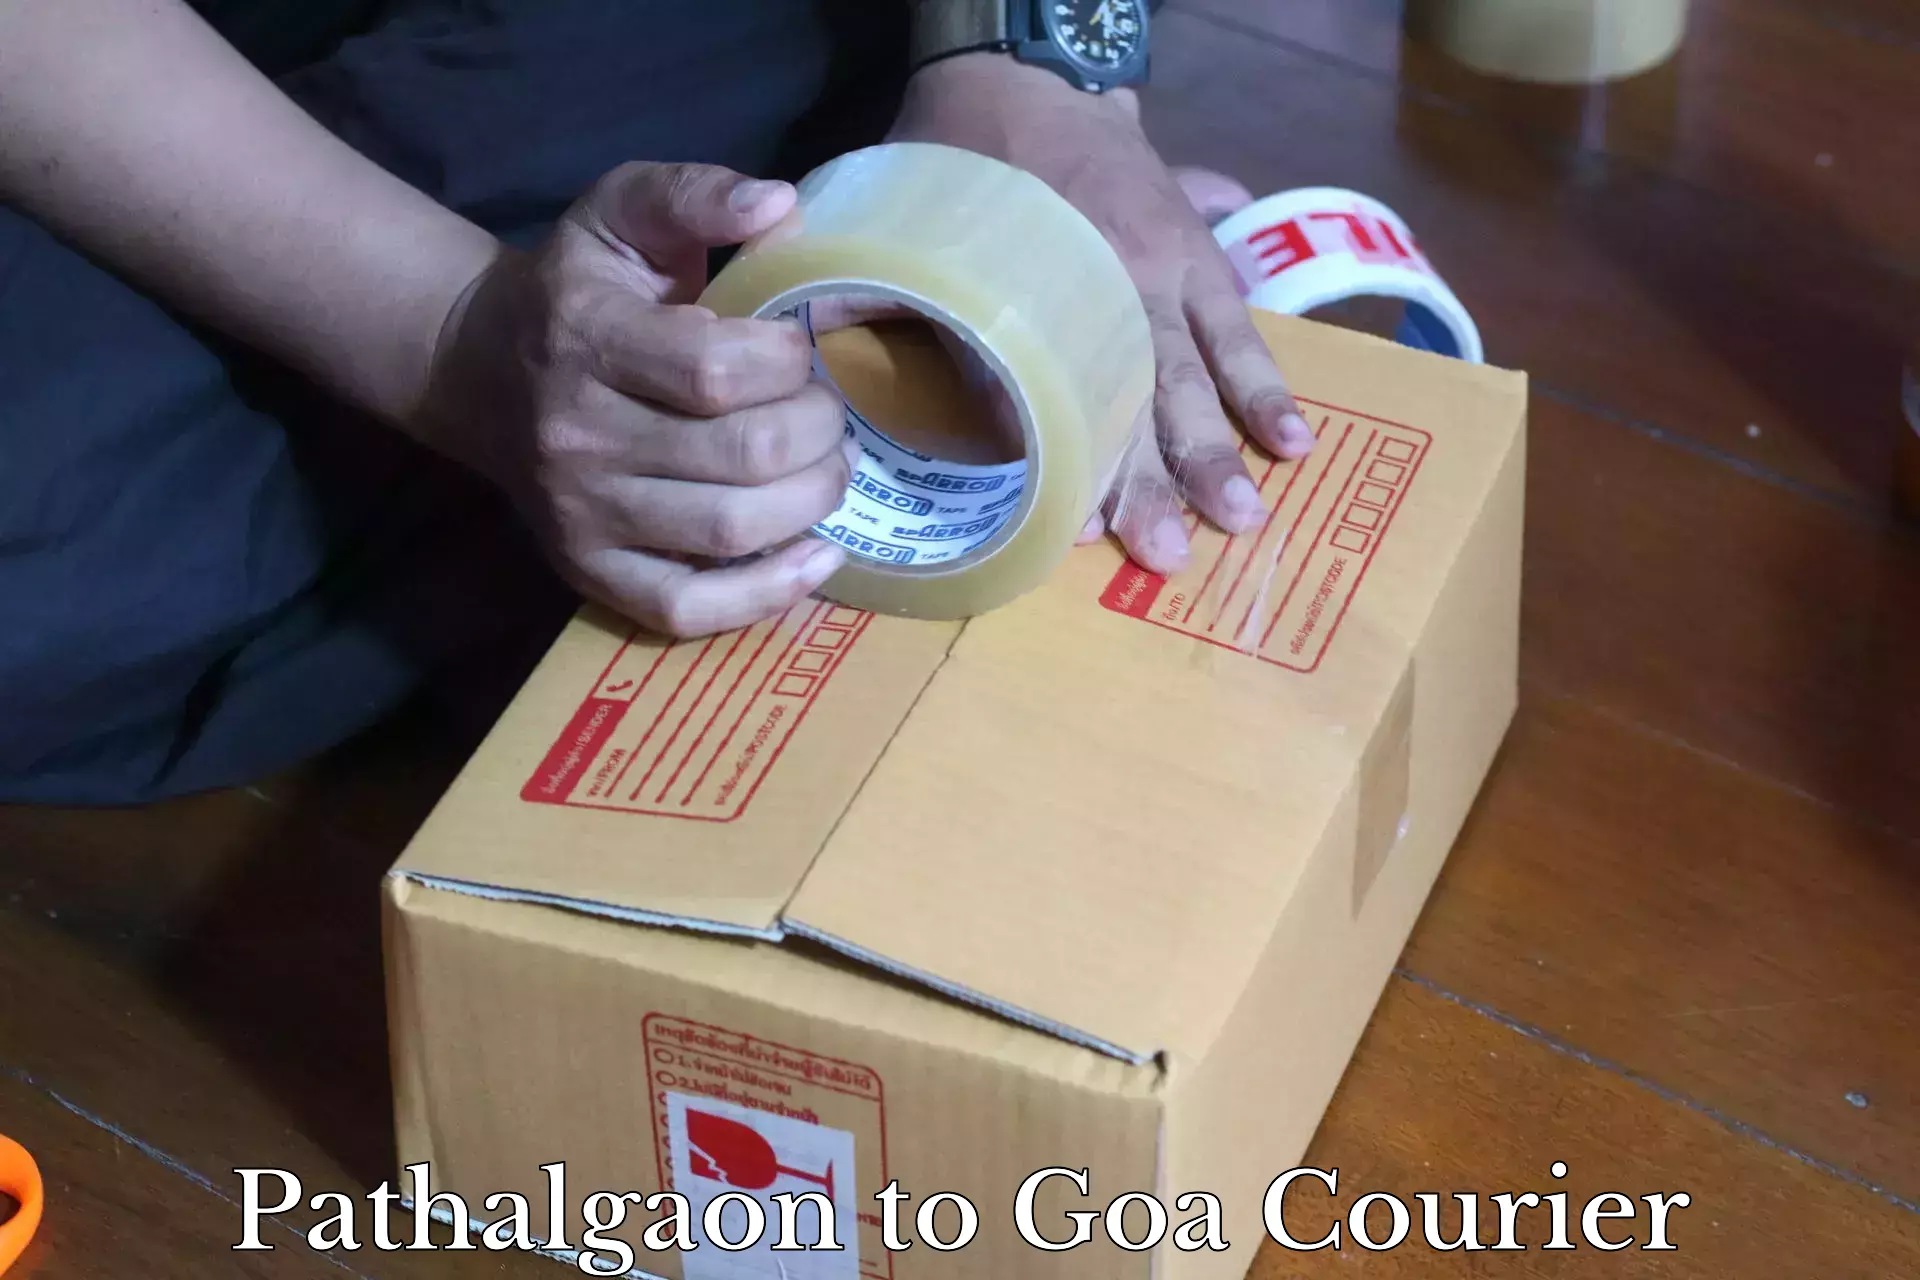 Courier service efficiency Pathalgaon to Bardez